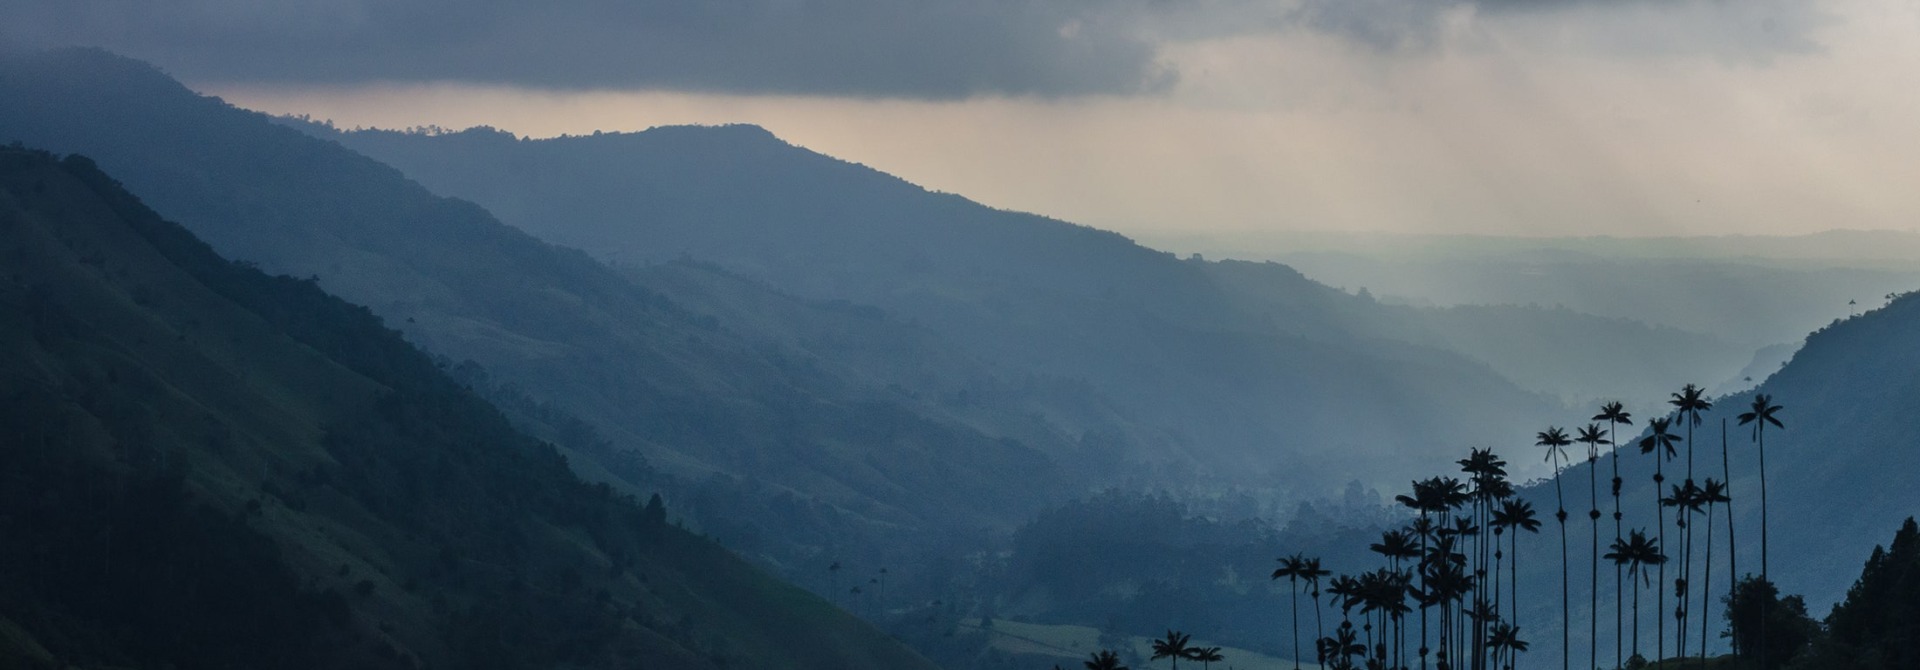 Central Cordillera of the Andean mountains, in Colombia, by Exequiel Schvartz